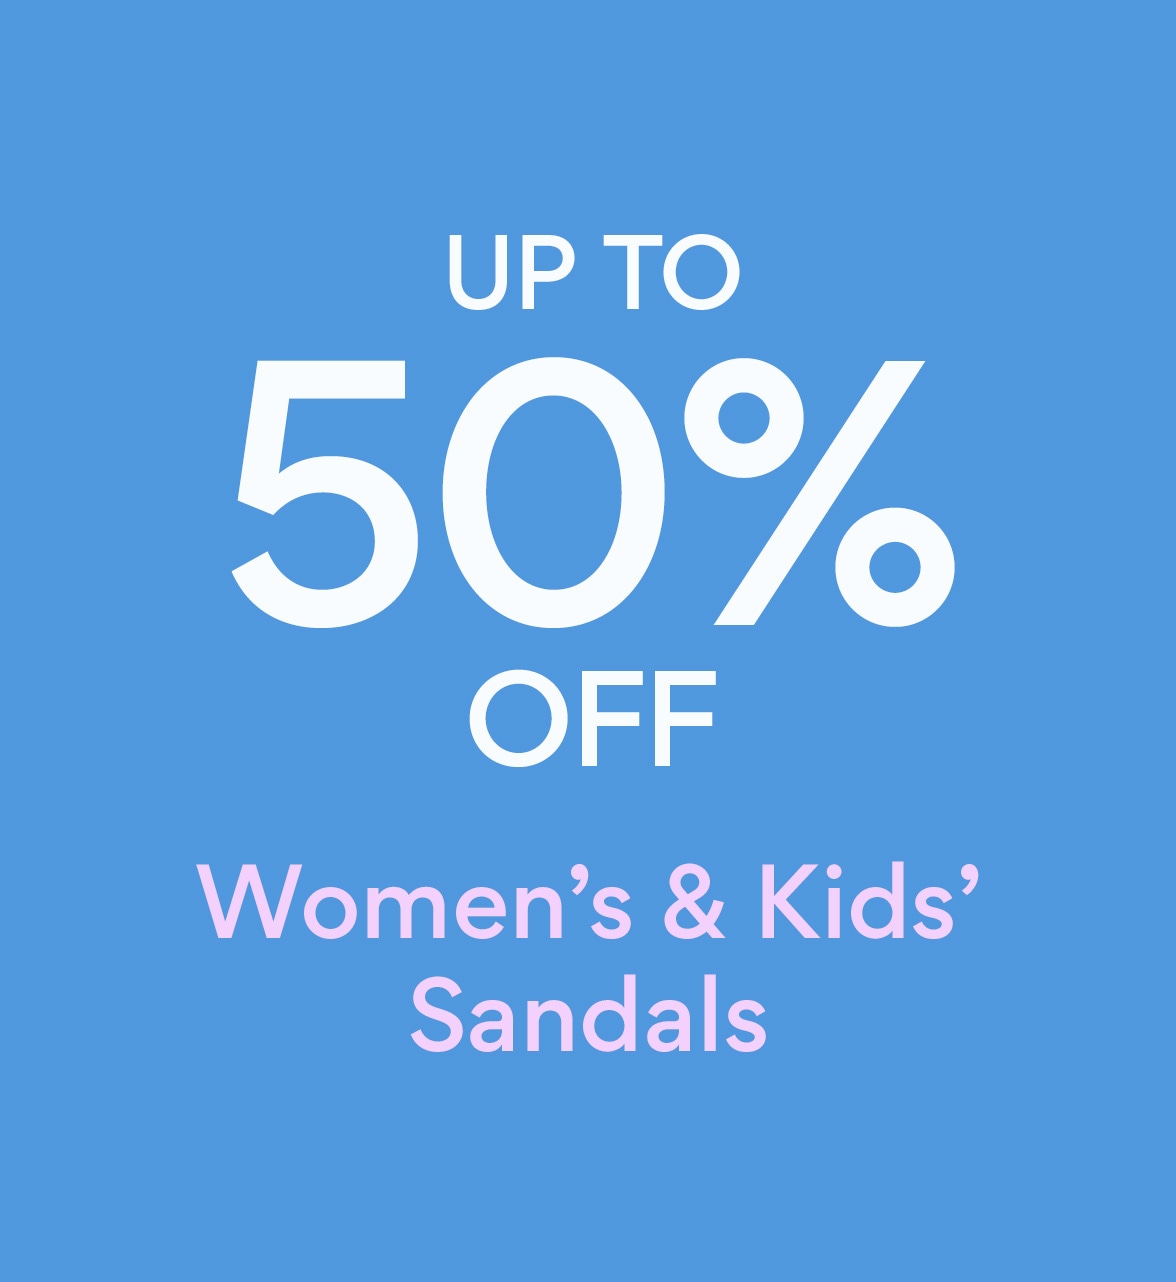 up to 50% off women's and kids' sandals